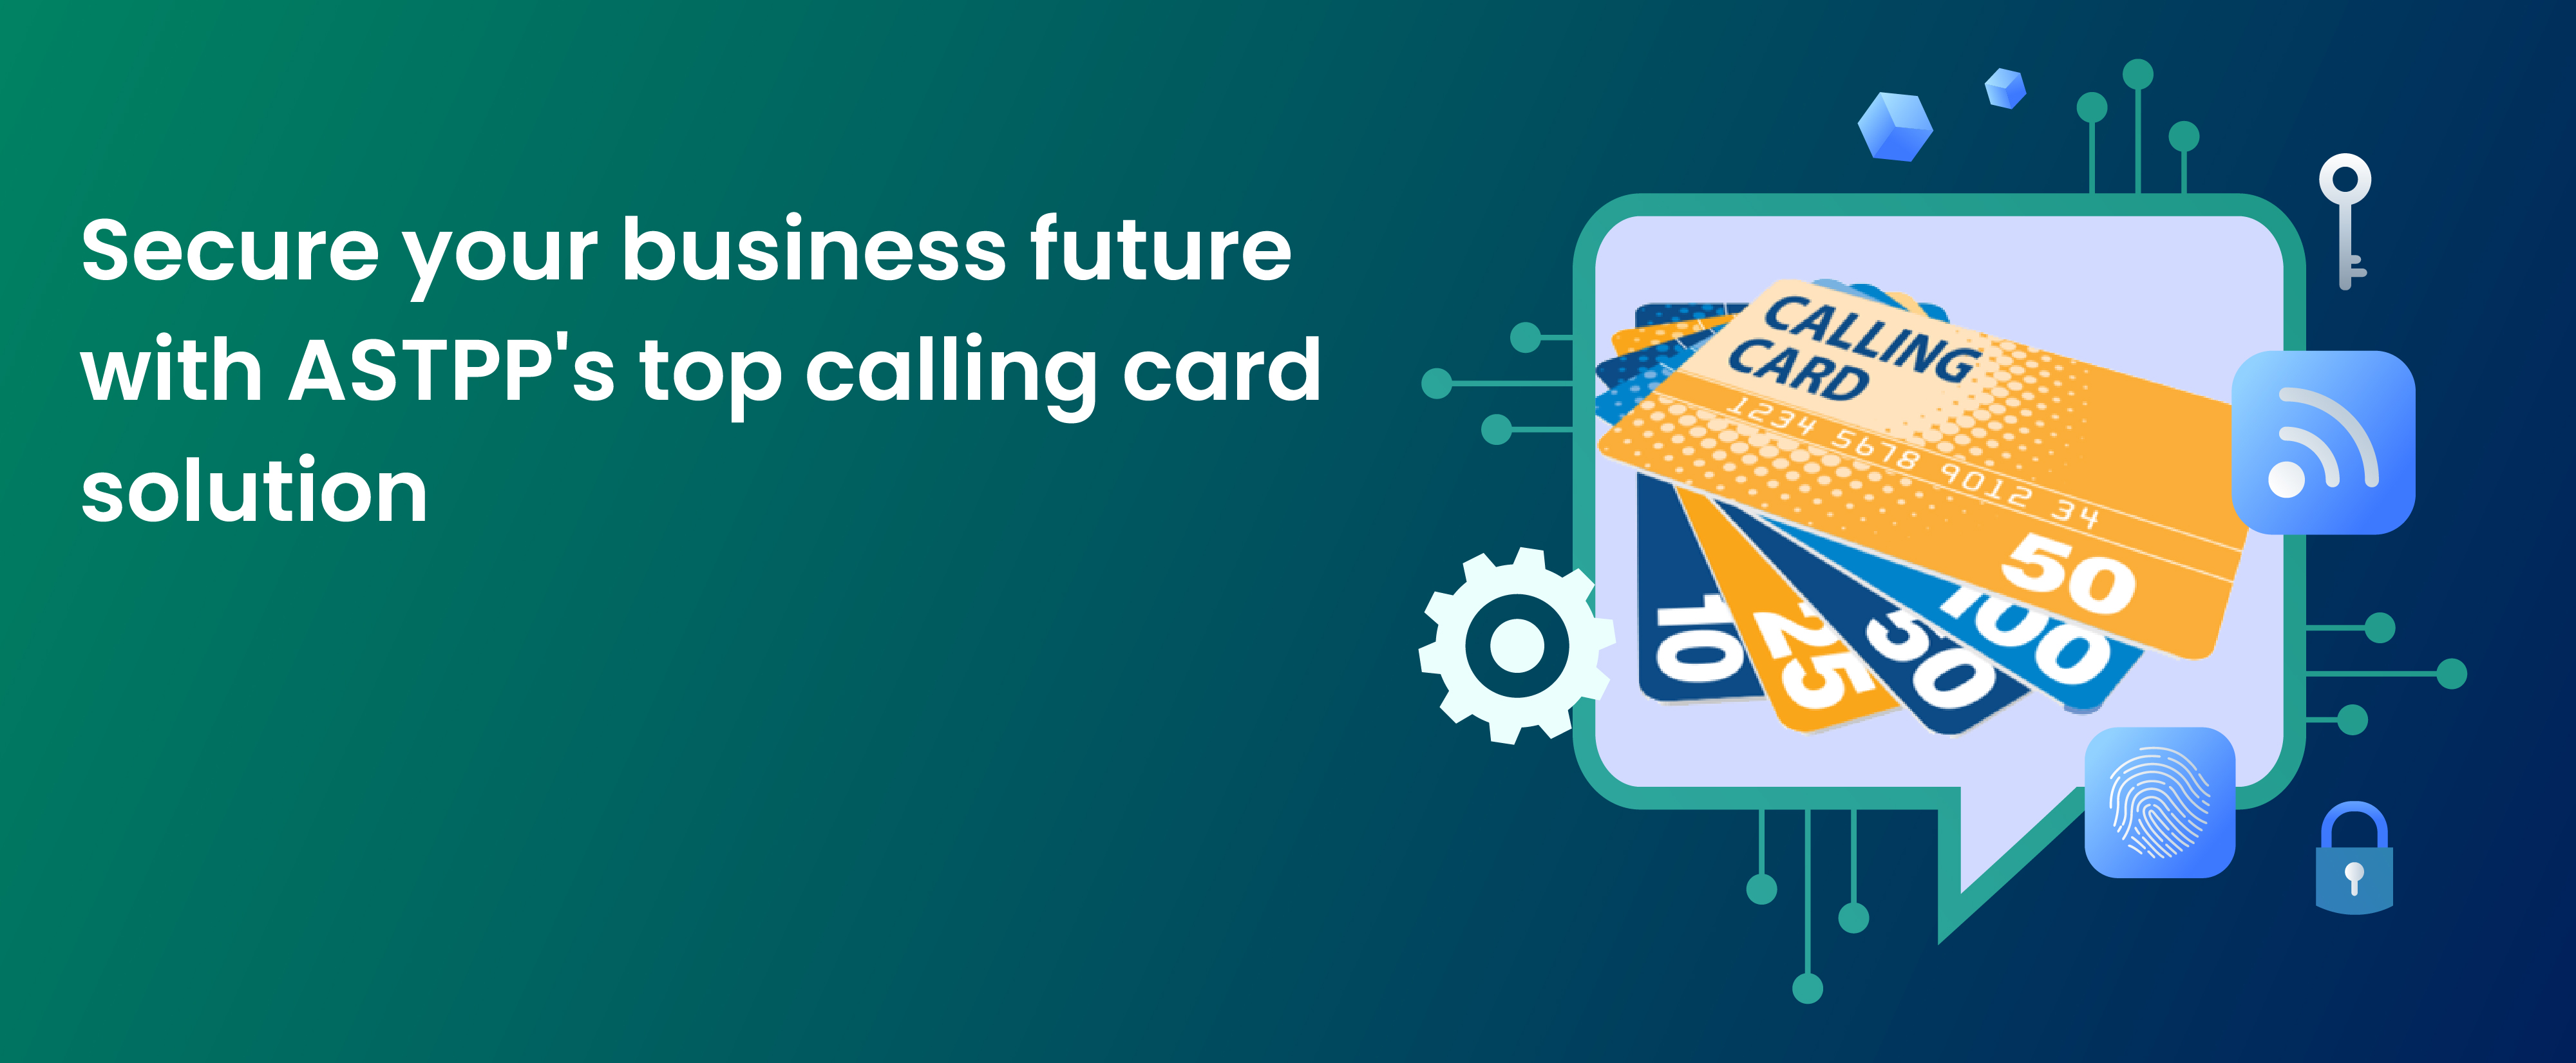 Future Proof your business with secure calling cards